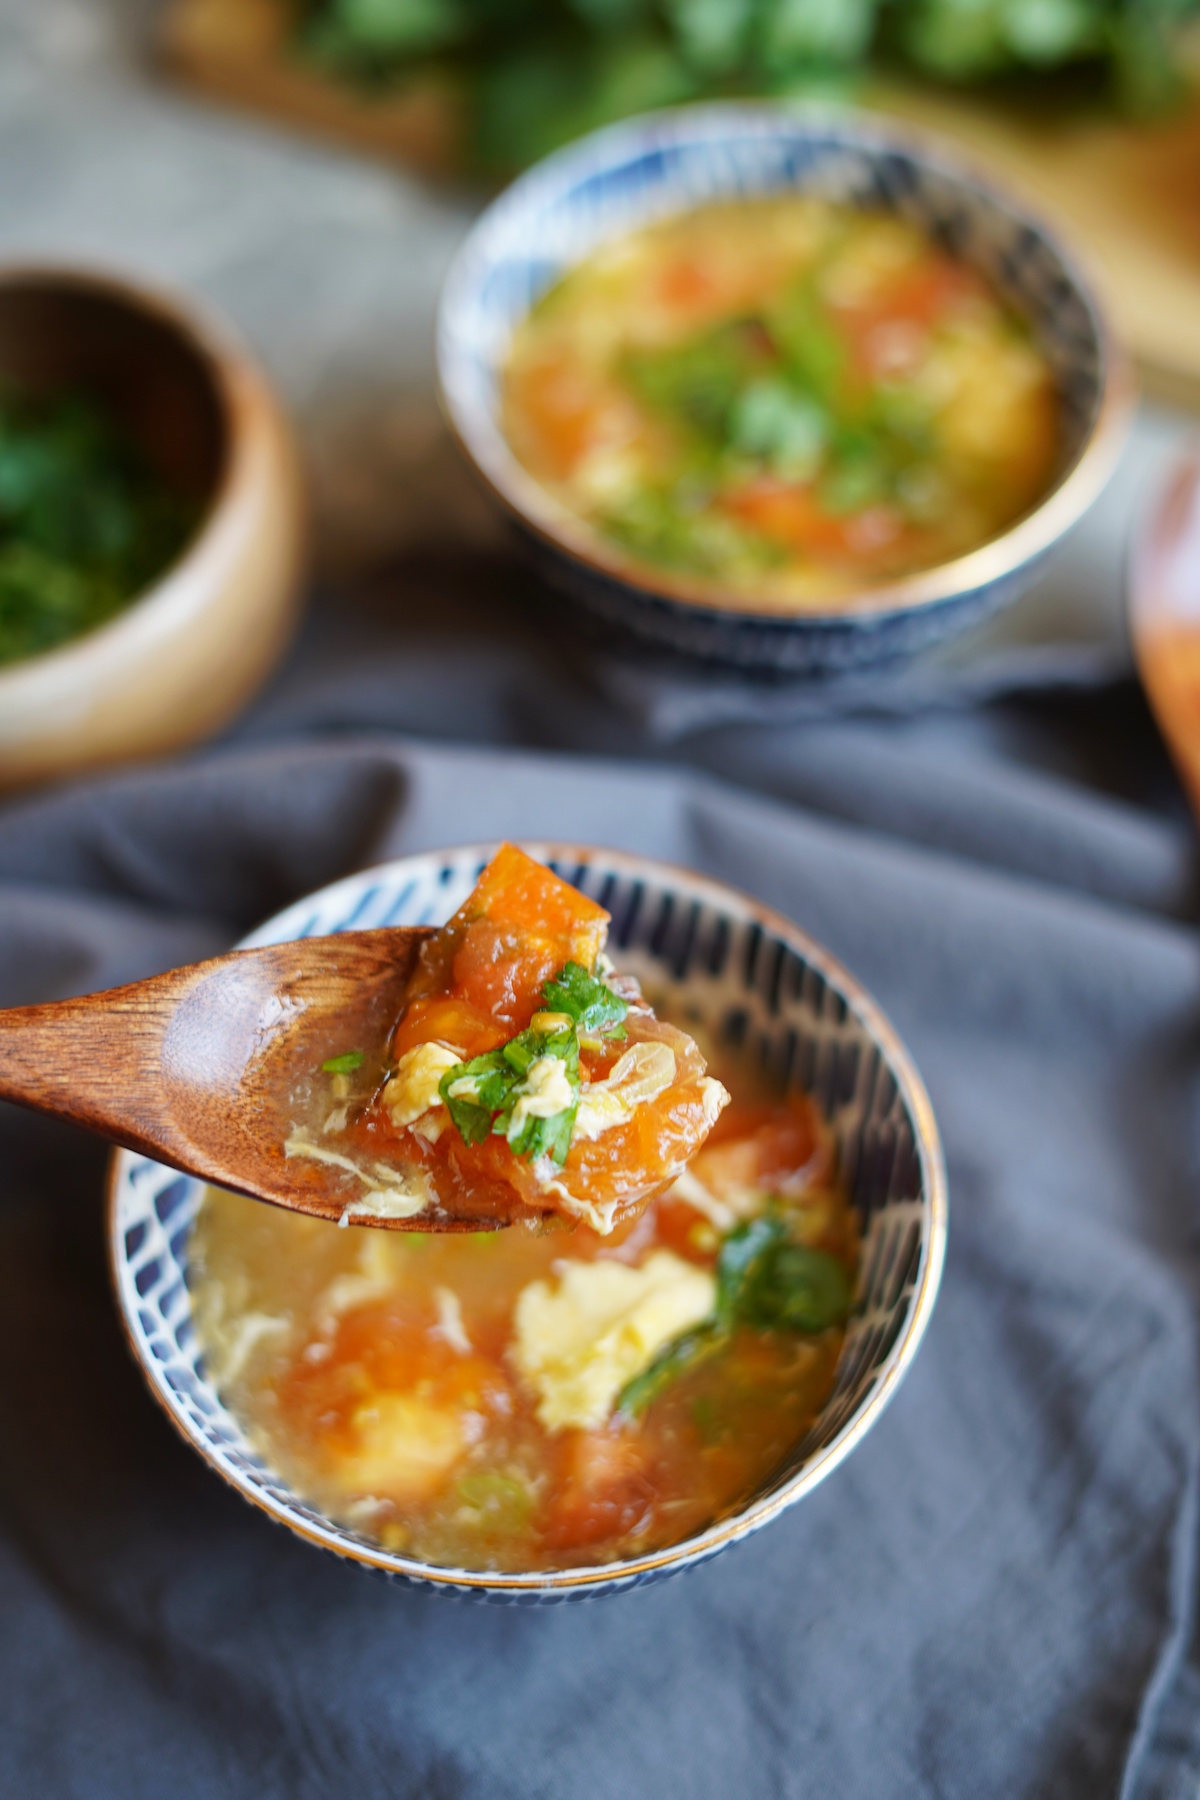 A spoonful of tomato egg drop soup.